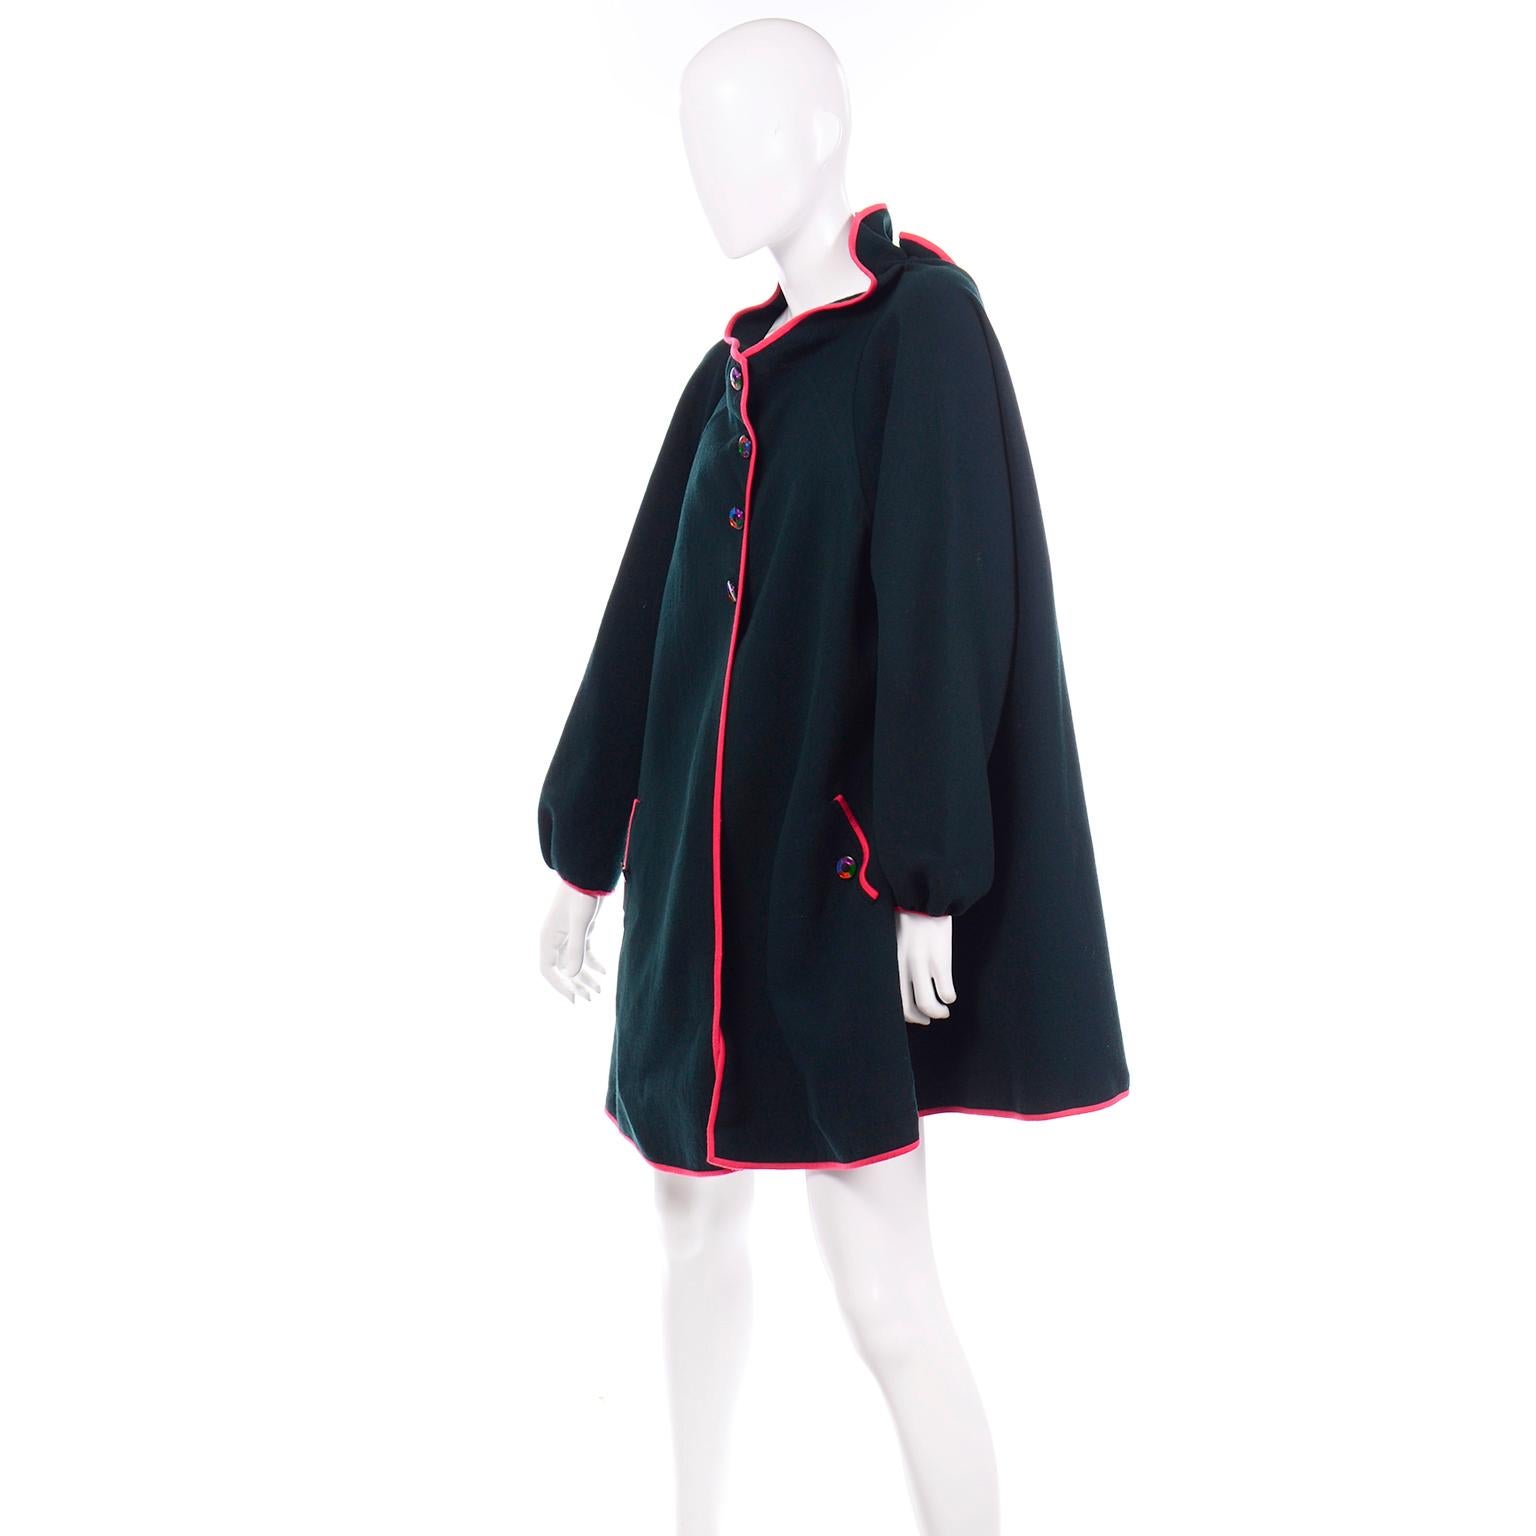 This vintage semi swing coat was designed by Geoffrey Beene and was purchased at Rizik Bos. inc in Washington DC.  This gorgeous coat is a rich deep green with raspberry red or deep pink trim and has unique multi colored buttons up the front to